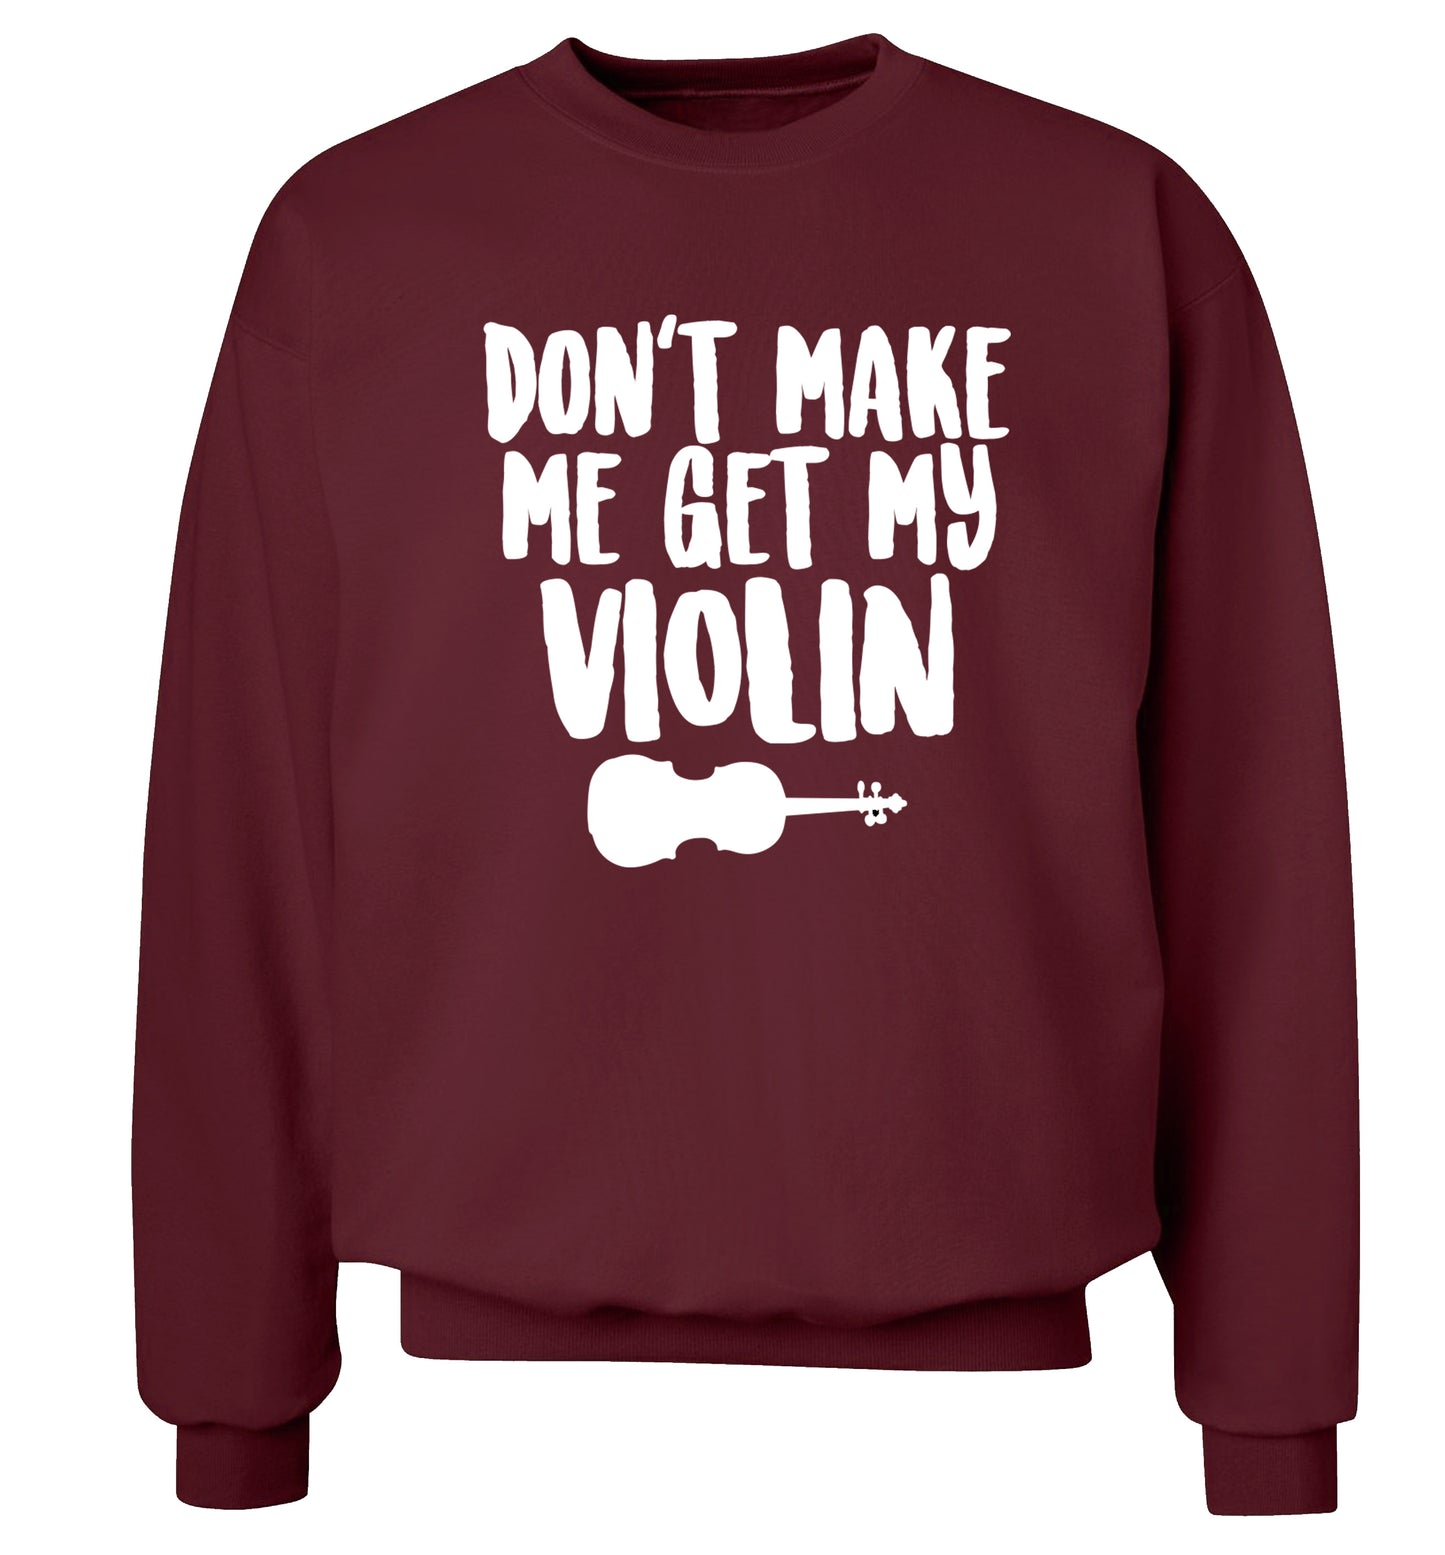 Don't make me get my violin Adult's unisex maroon Sweater 2XL